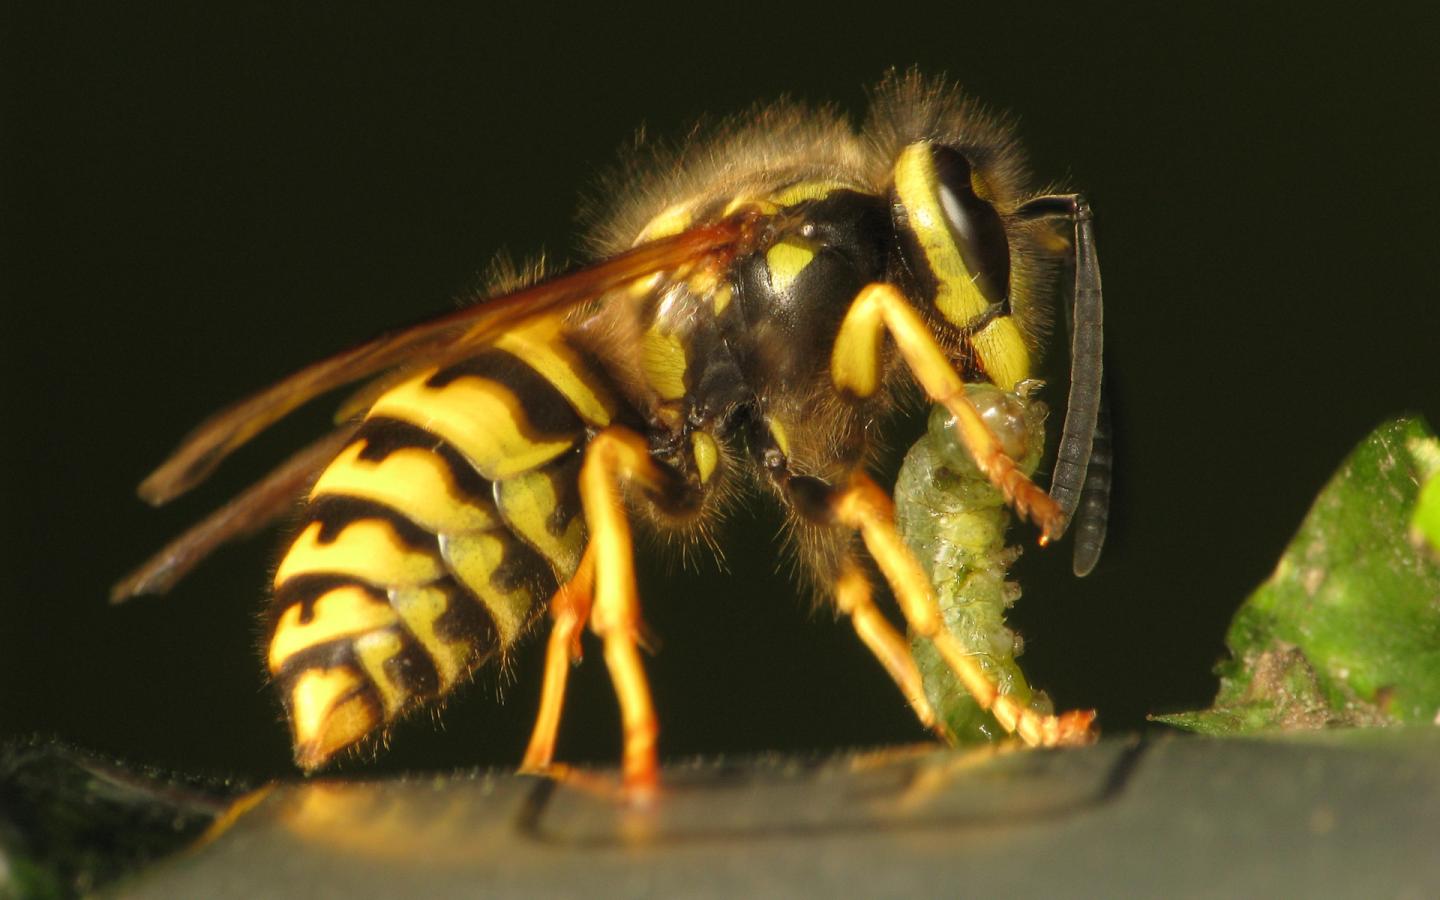 Call For Arms And Stings: Social Wasps Use Alarm Pheromones To Coordinate Their Attacks (1/3)